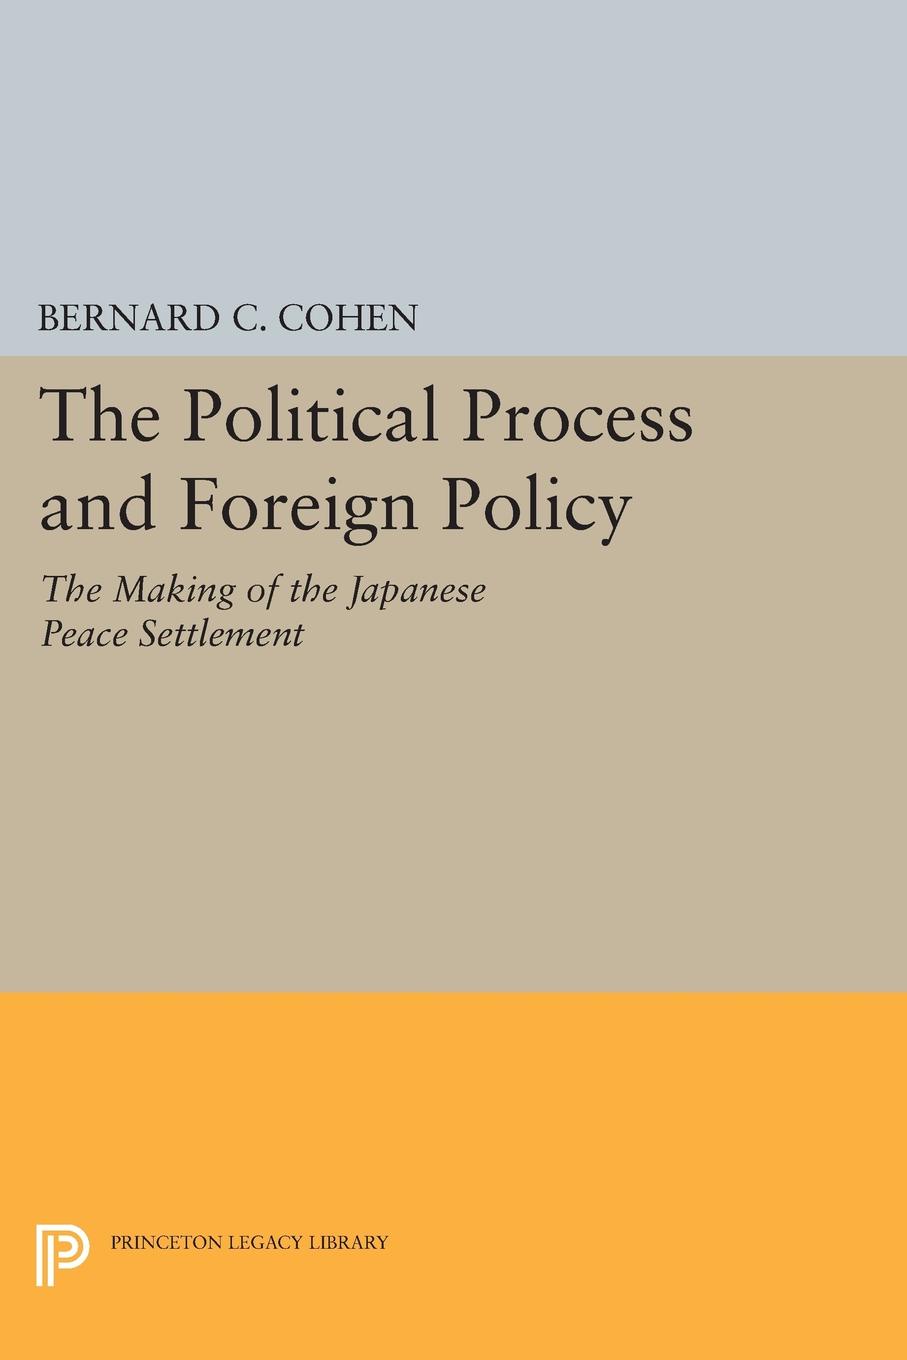 Political Process and Foreign Policy. The Making of the Japanese Peace